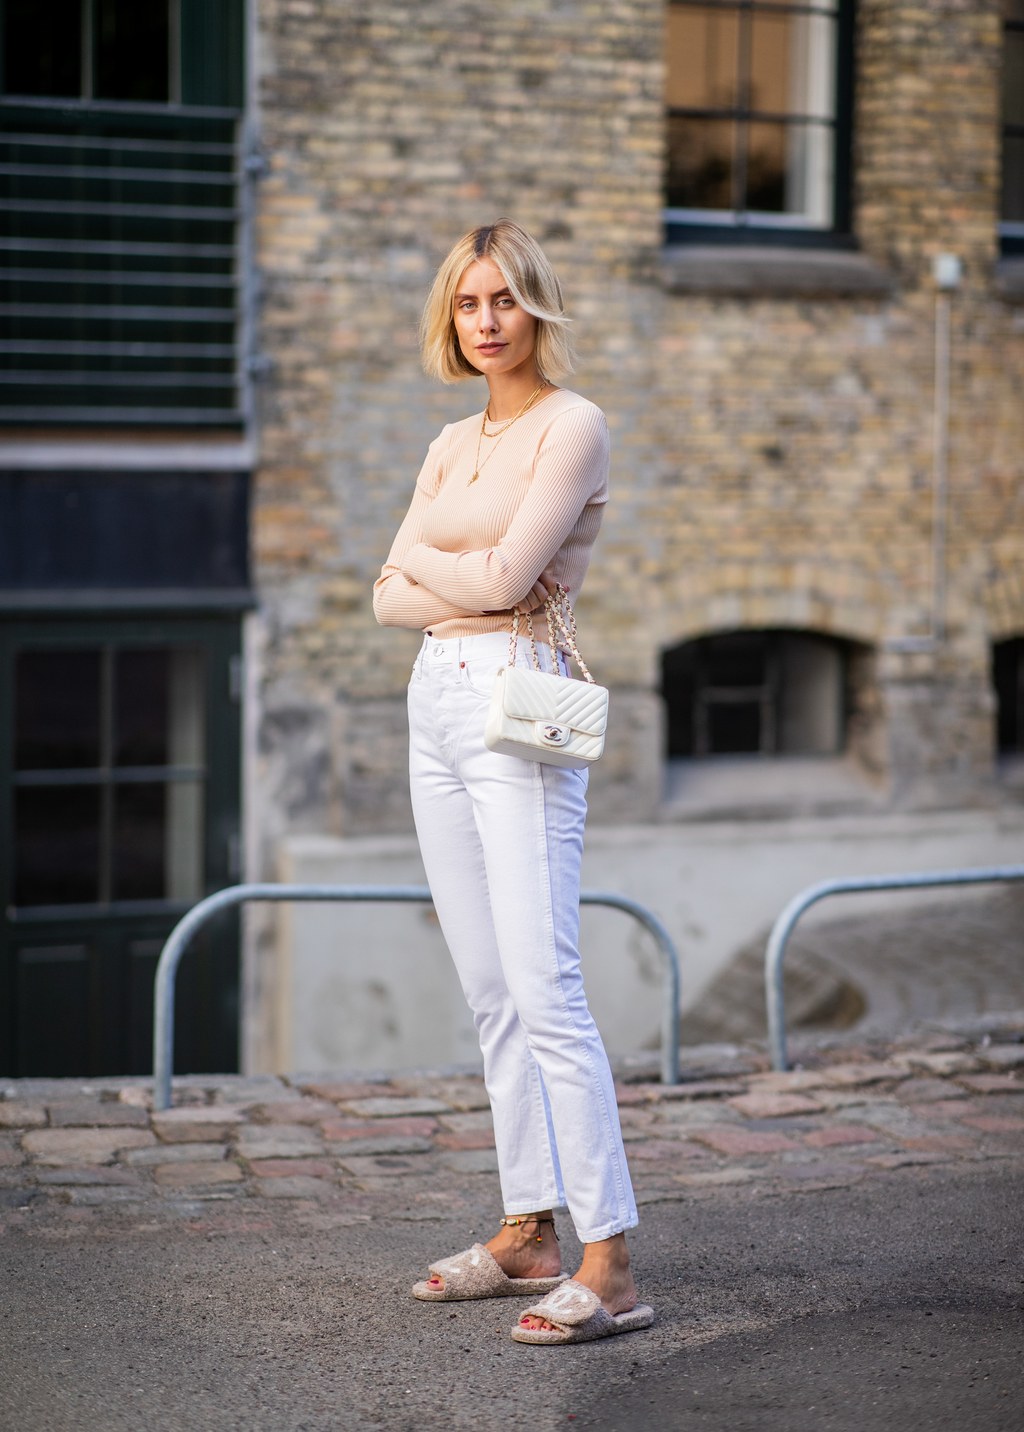 This Outfit Made Us Want To Break Out The White Denim